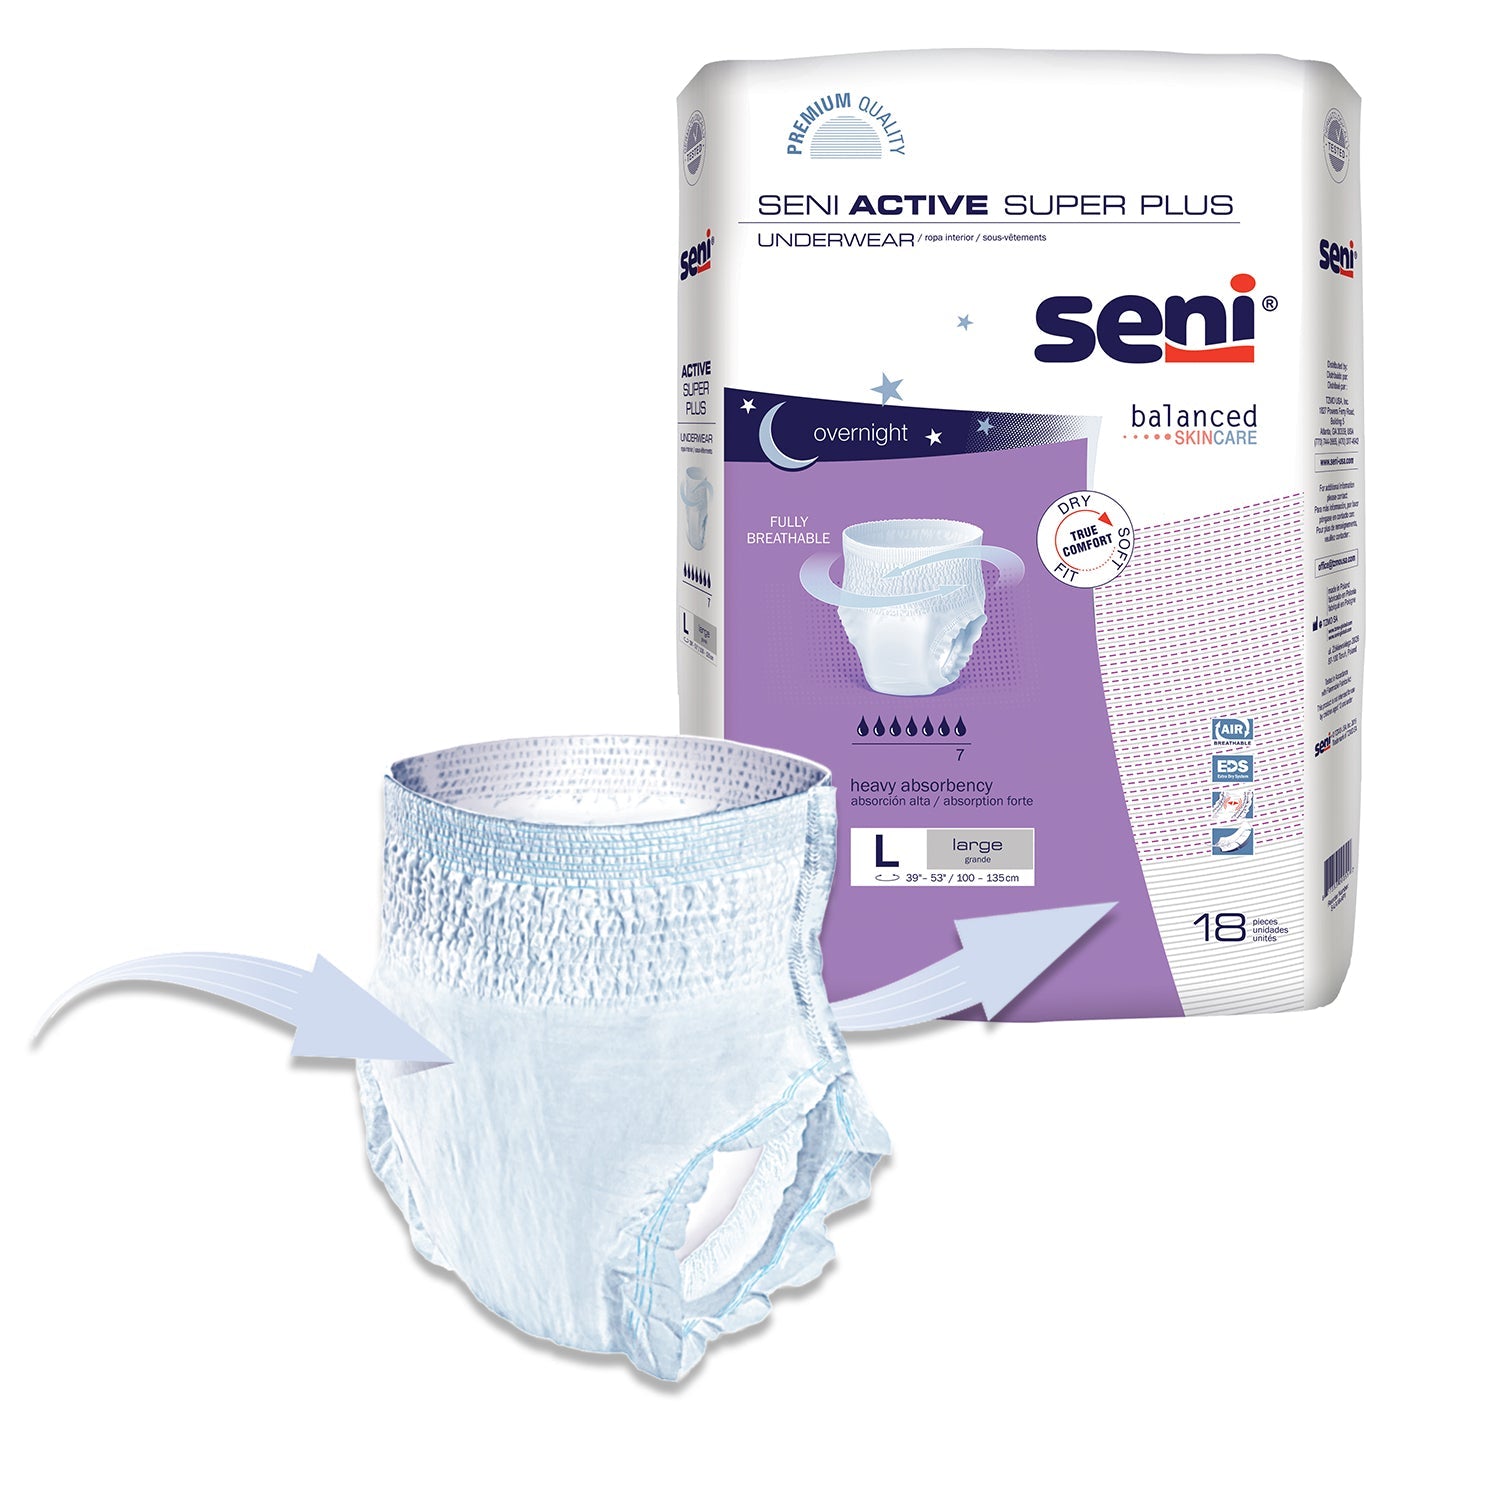 Trial Pack of Seni Active Super Plus Underwear - Small